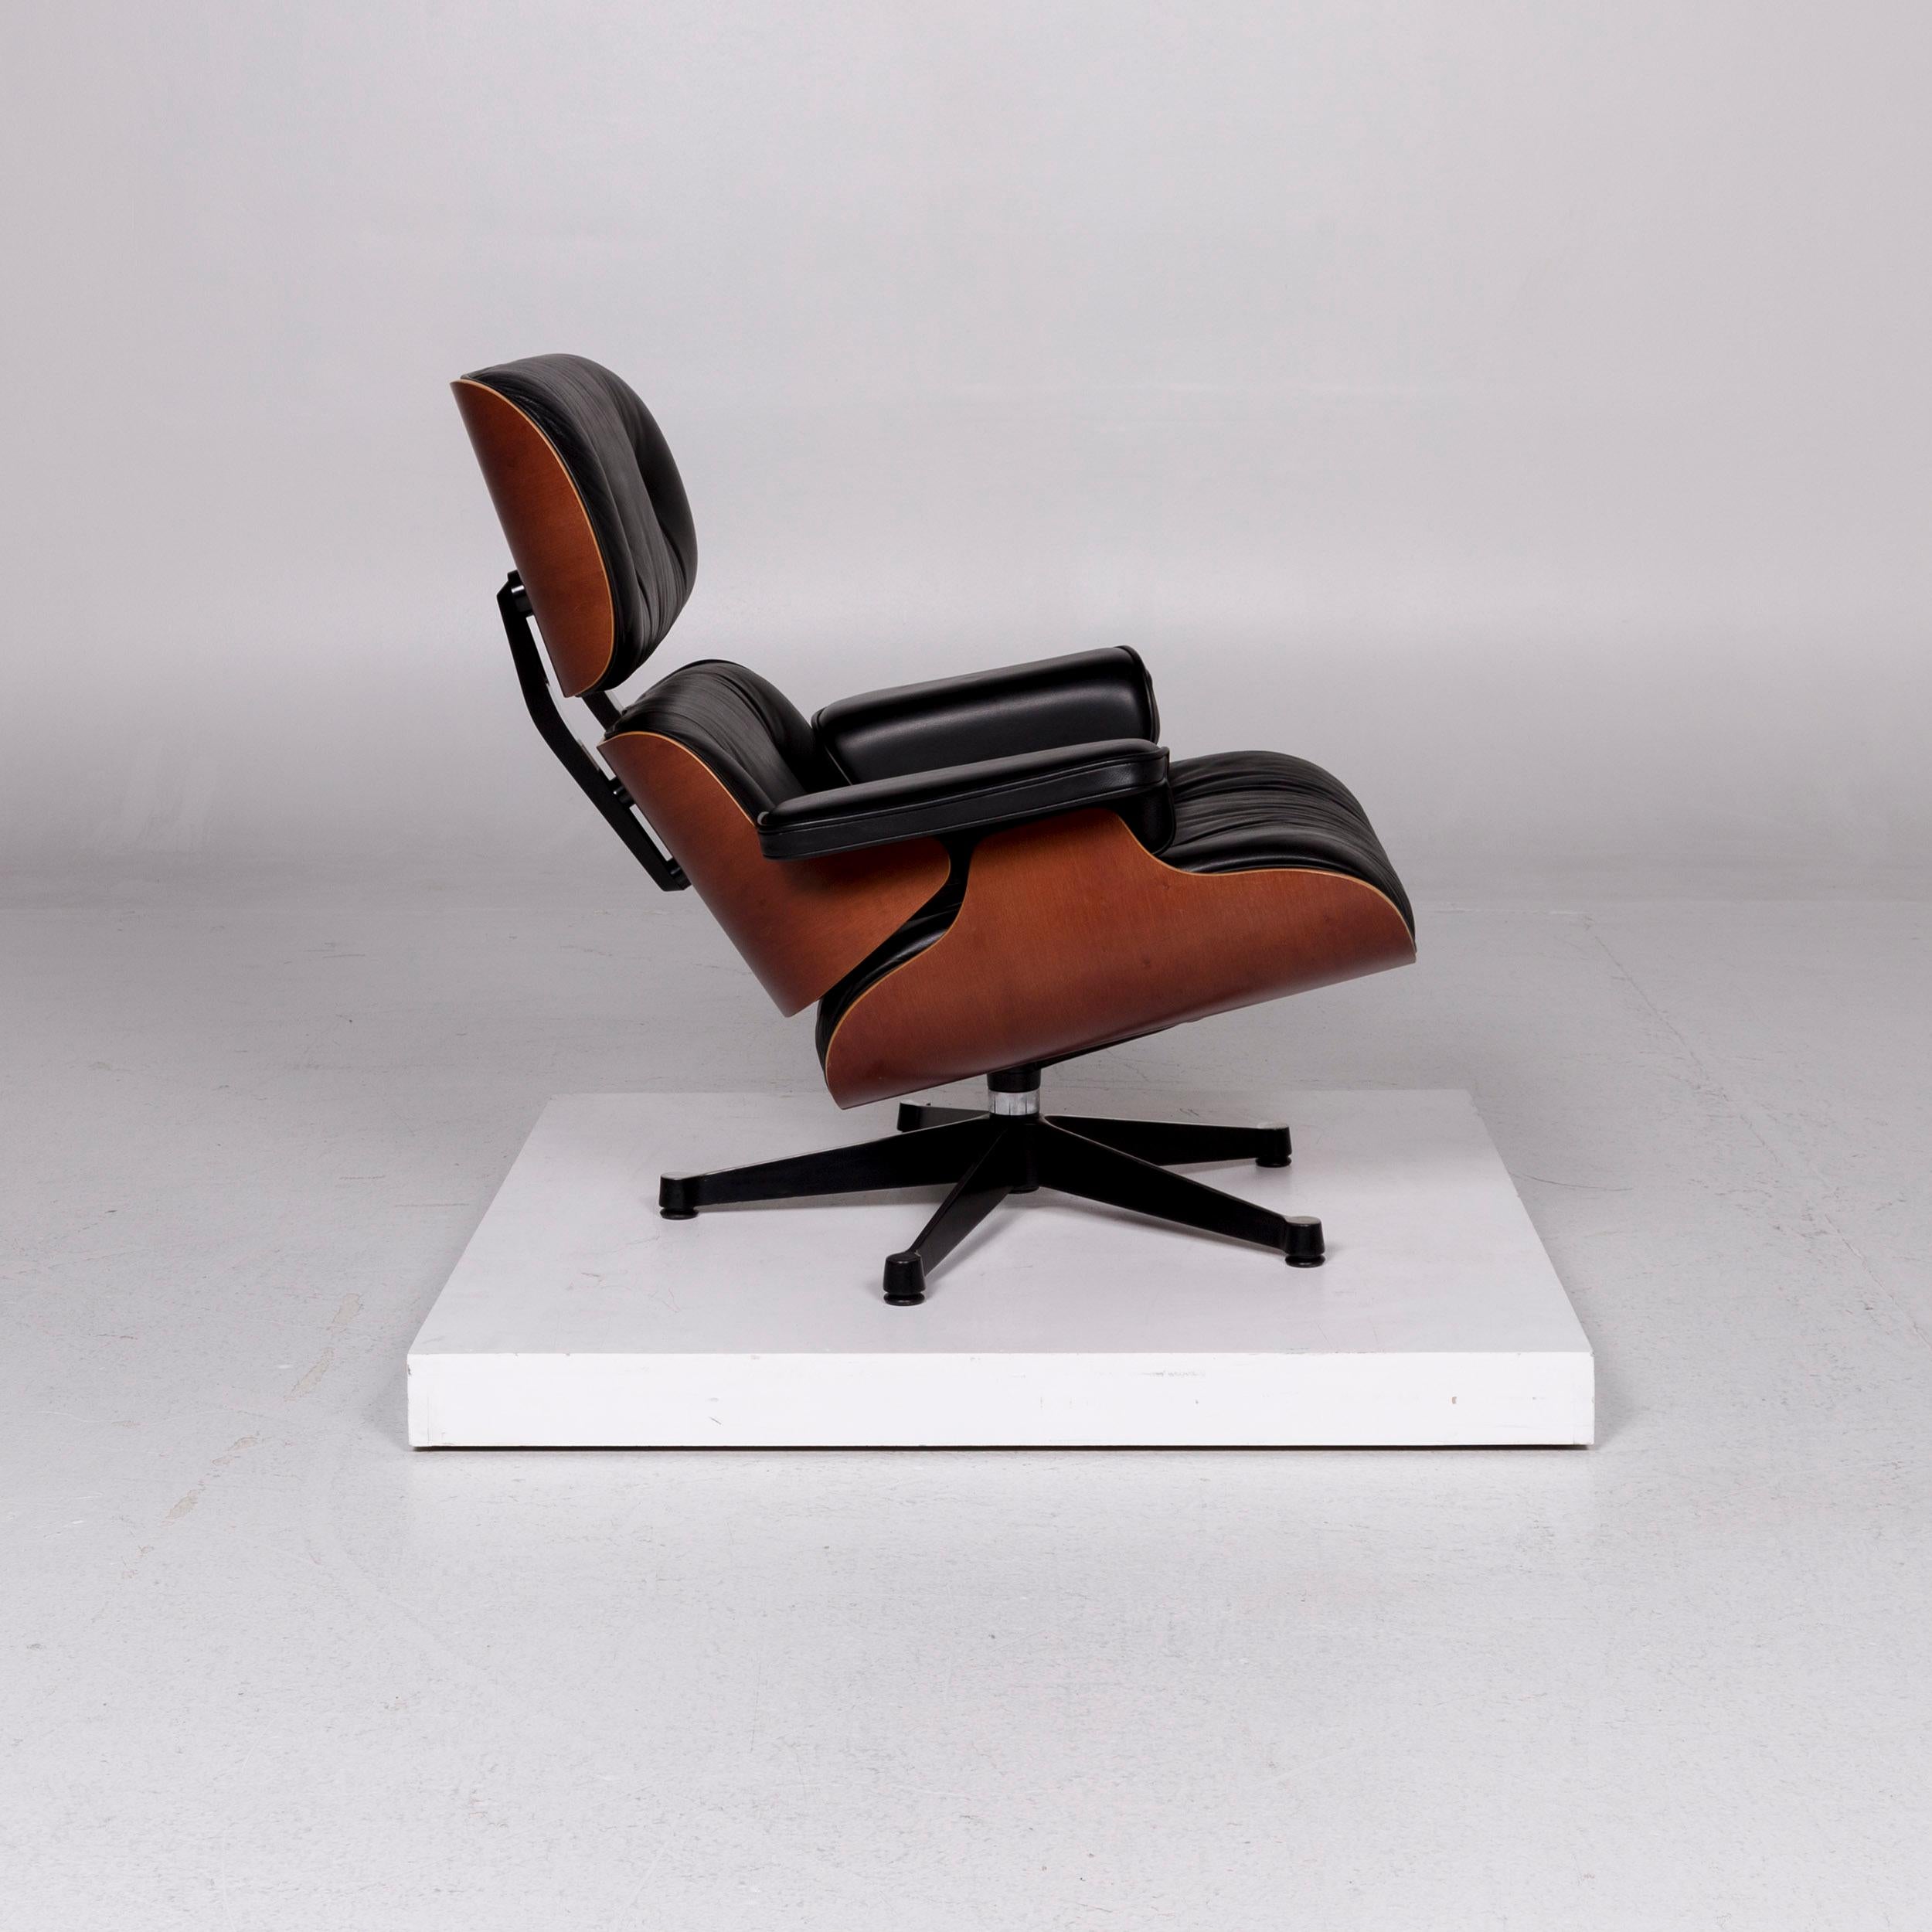 Vitra Eames Lounge Chair Leather Armchair Black Charles & Ray Eames Club Chair In Good Condition For Sale In Cologne, DE